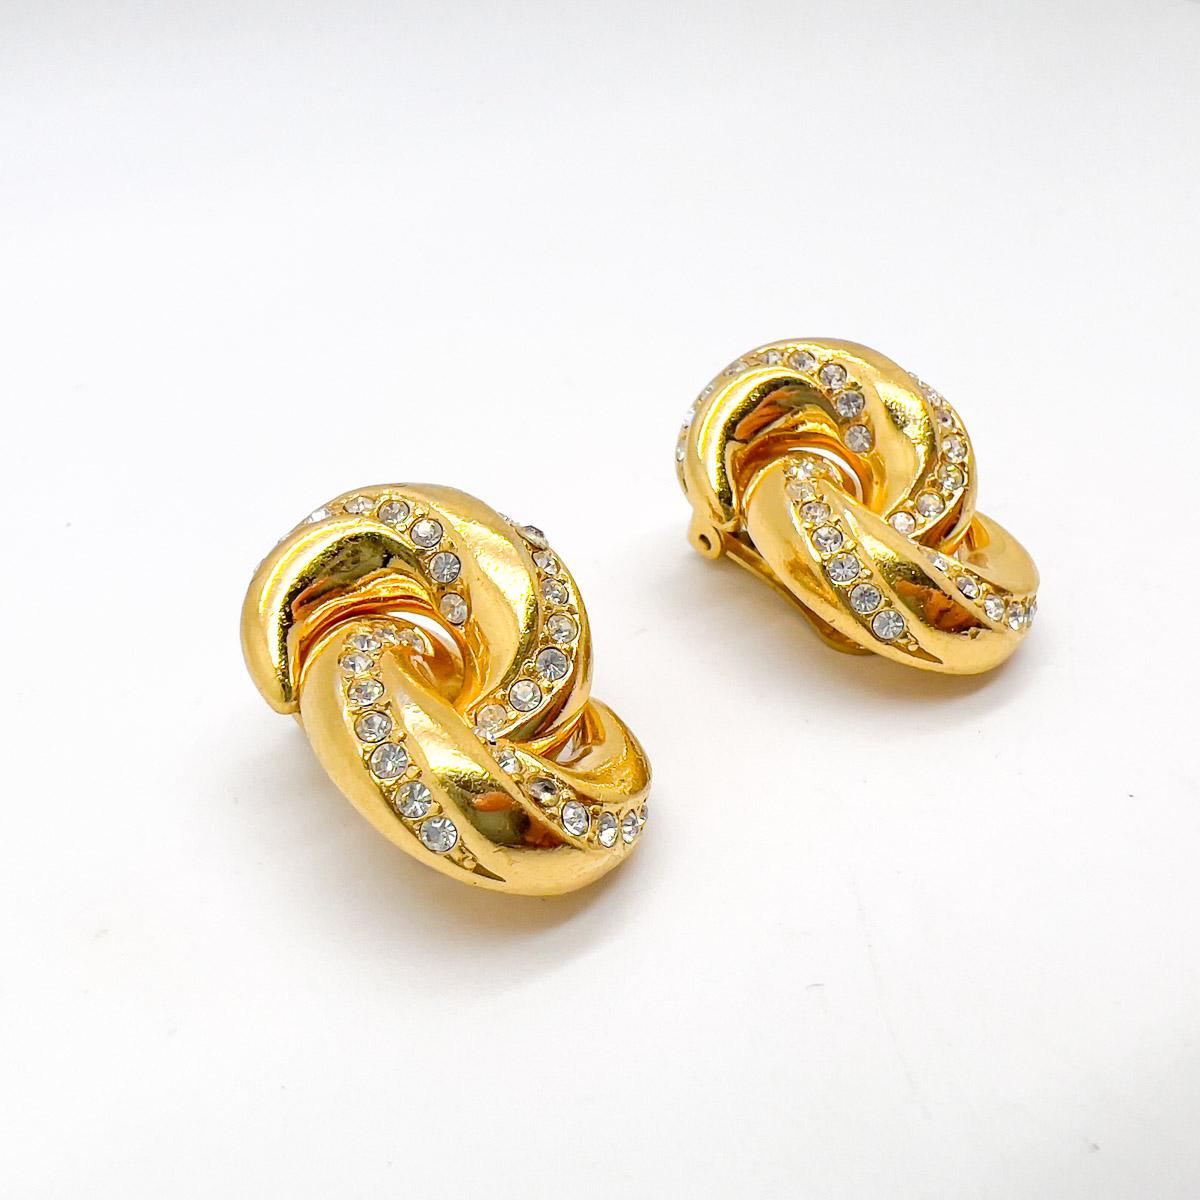 Women's Vintage Christian Dior Embellished Love Knot Earrings 1980s For Sale